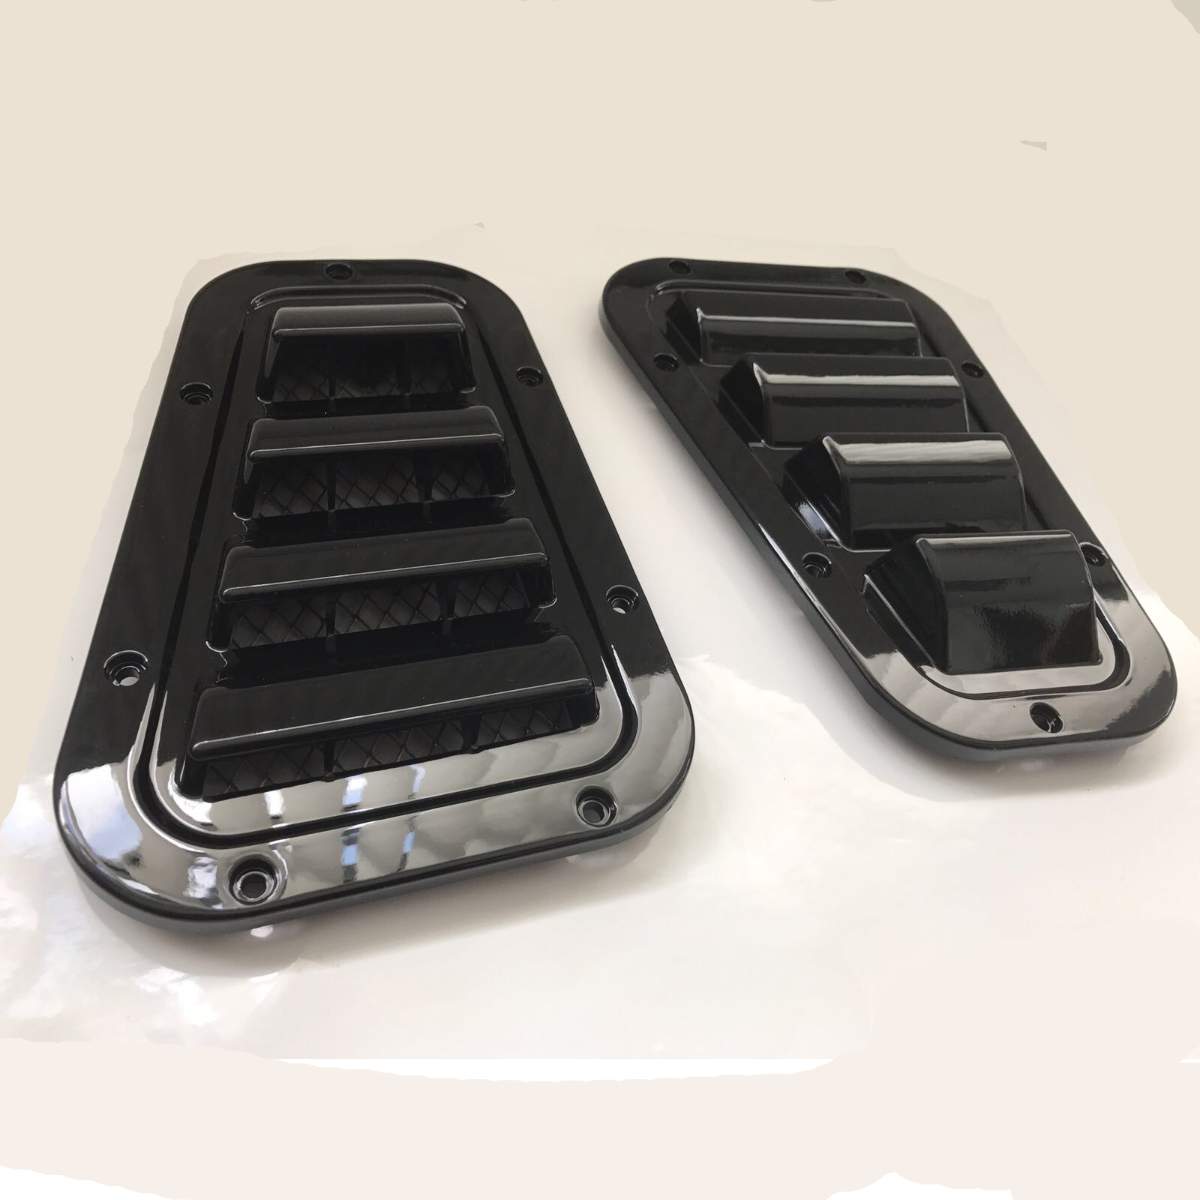 Land Rover 90/110 Stainless Steel Wing Top Vents PAIR